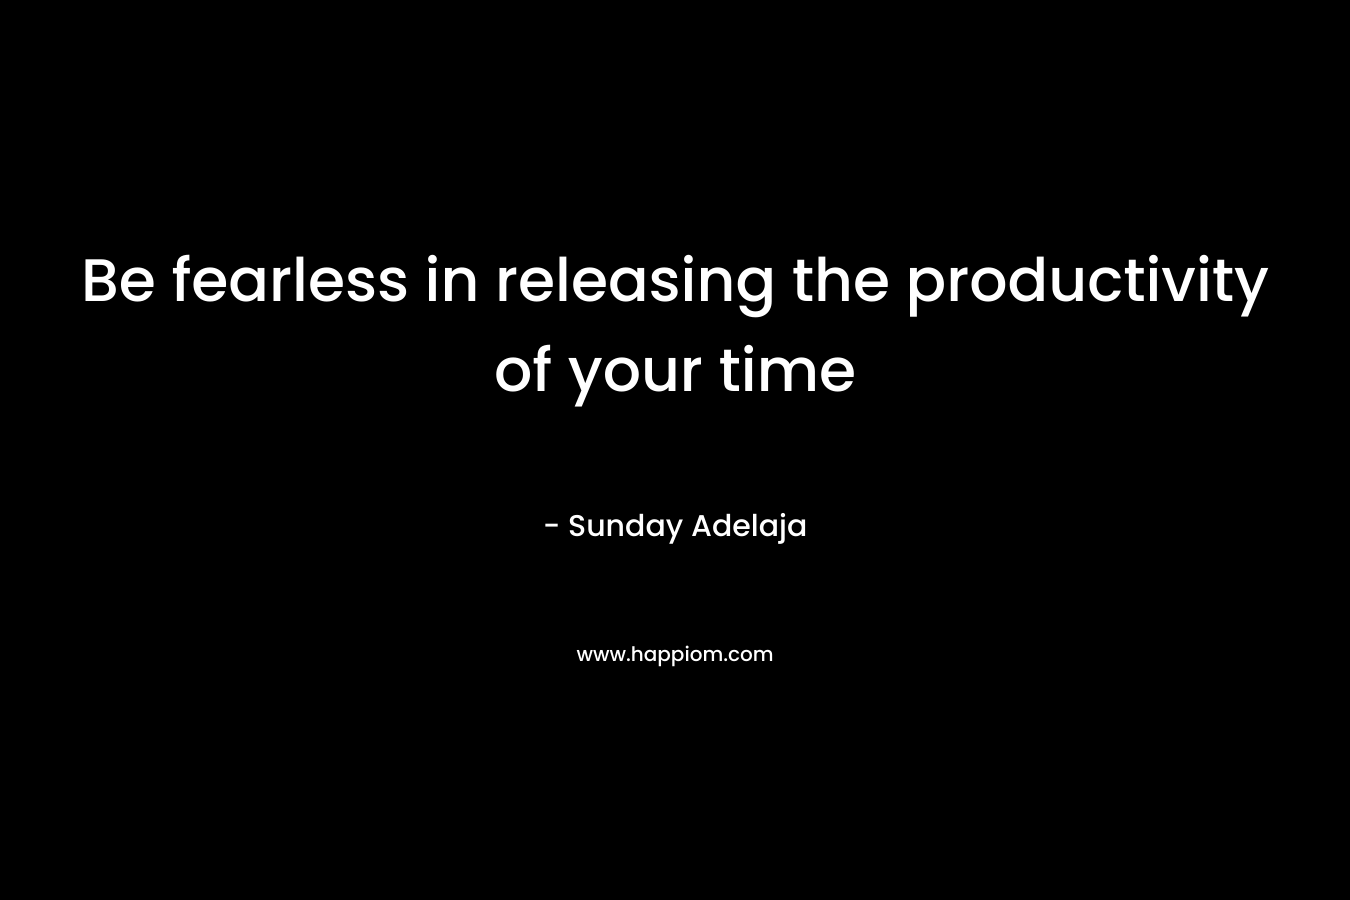 Be fearless in releasing the productivity of your time